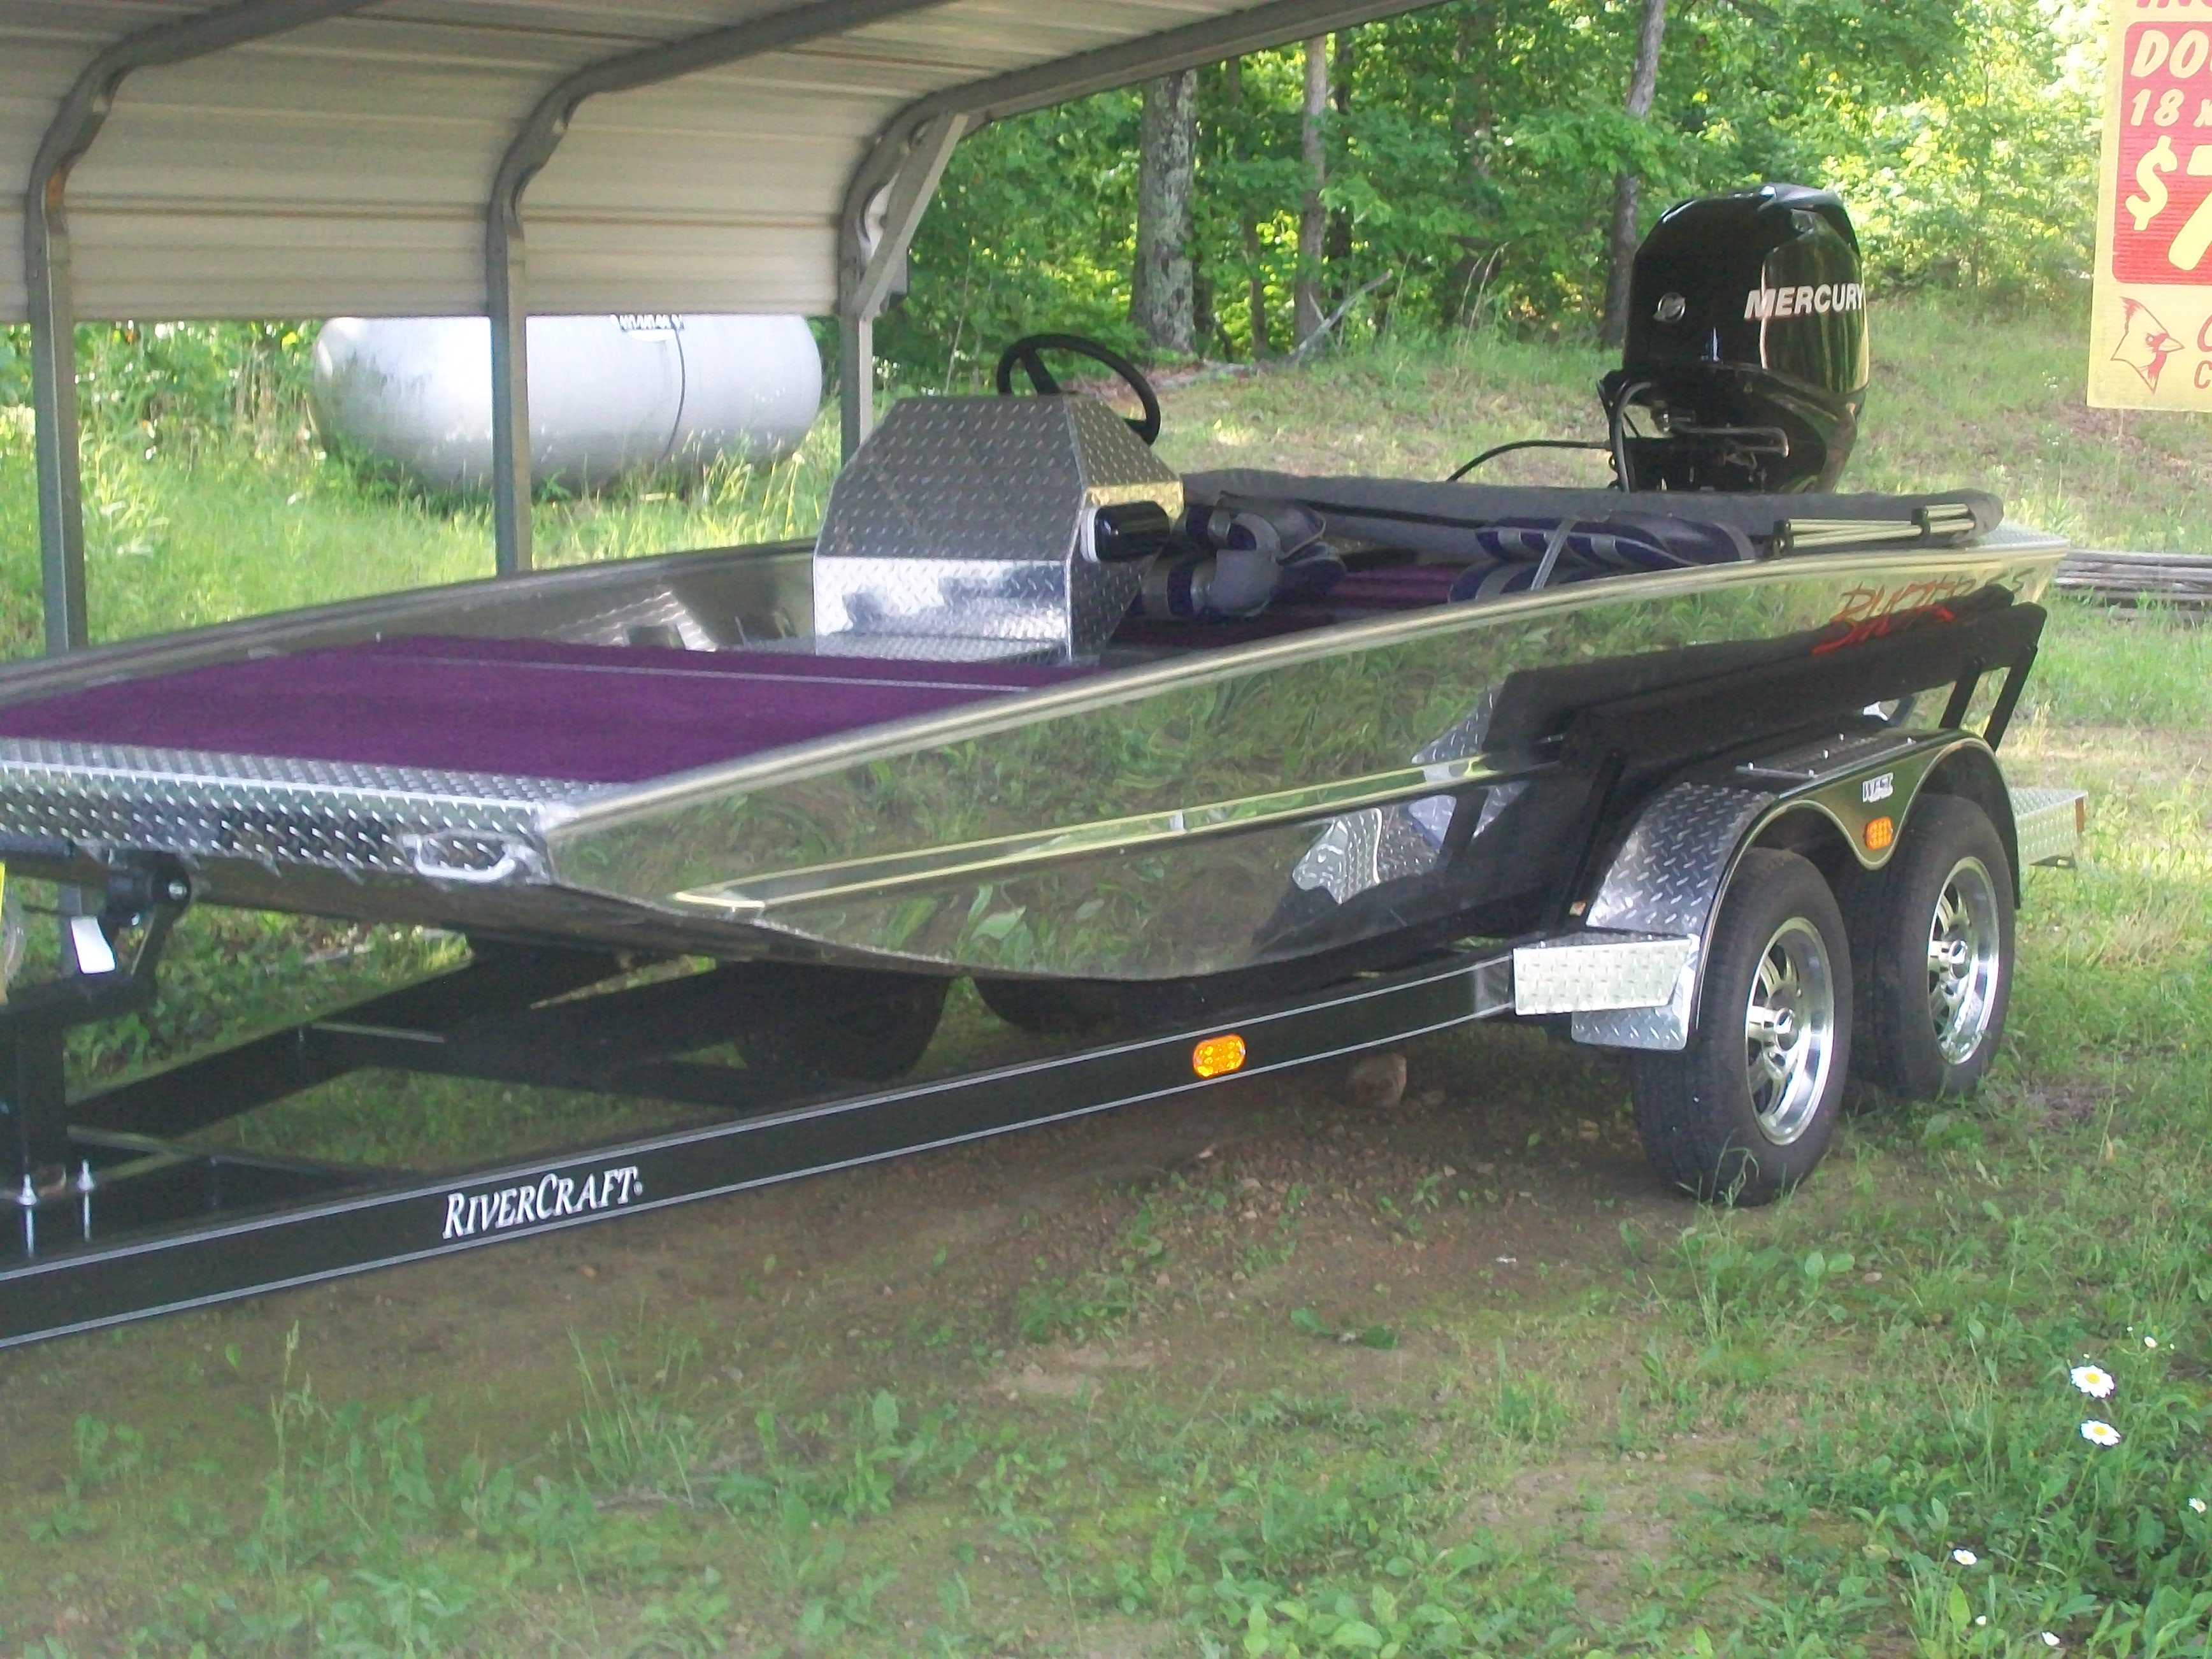 Let us build you a new jet boat!